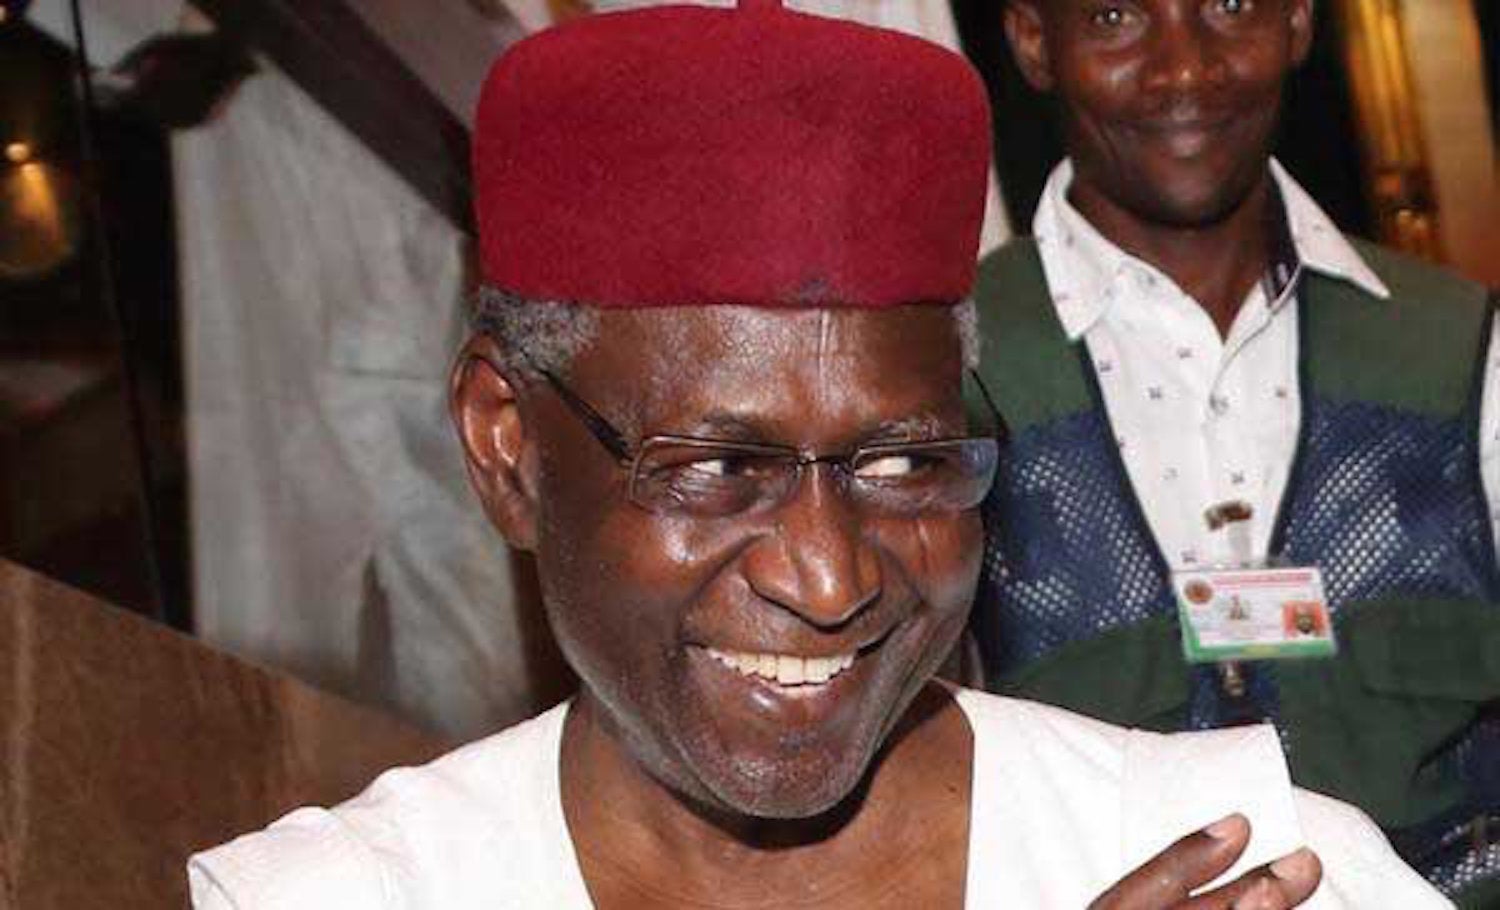 Late Abba Kyari, until his death on Friday, April 17, 2020 was the chief of staff to President Muhammadu Buhari